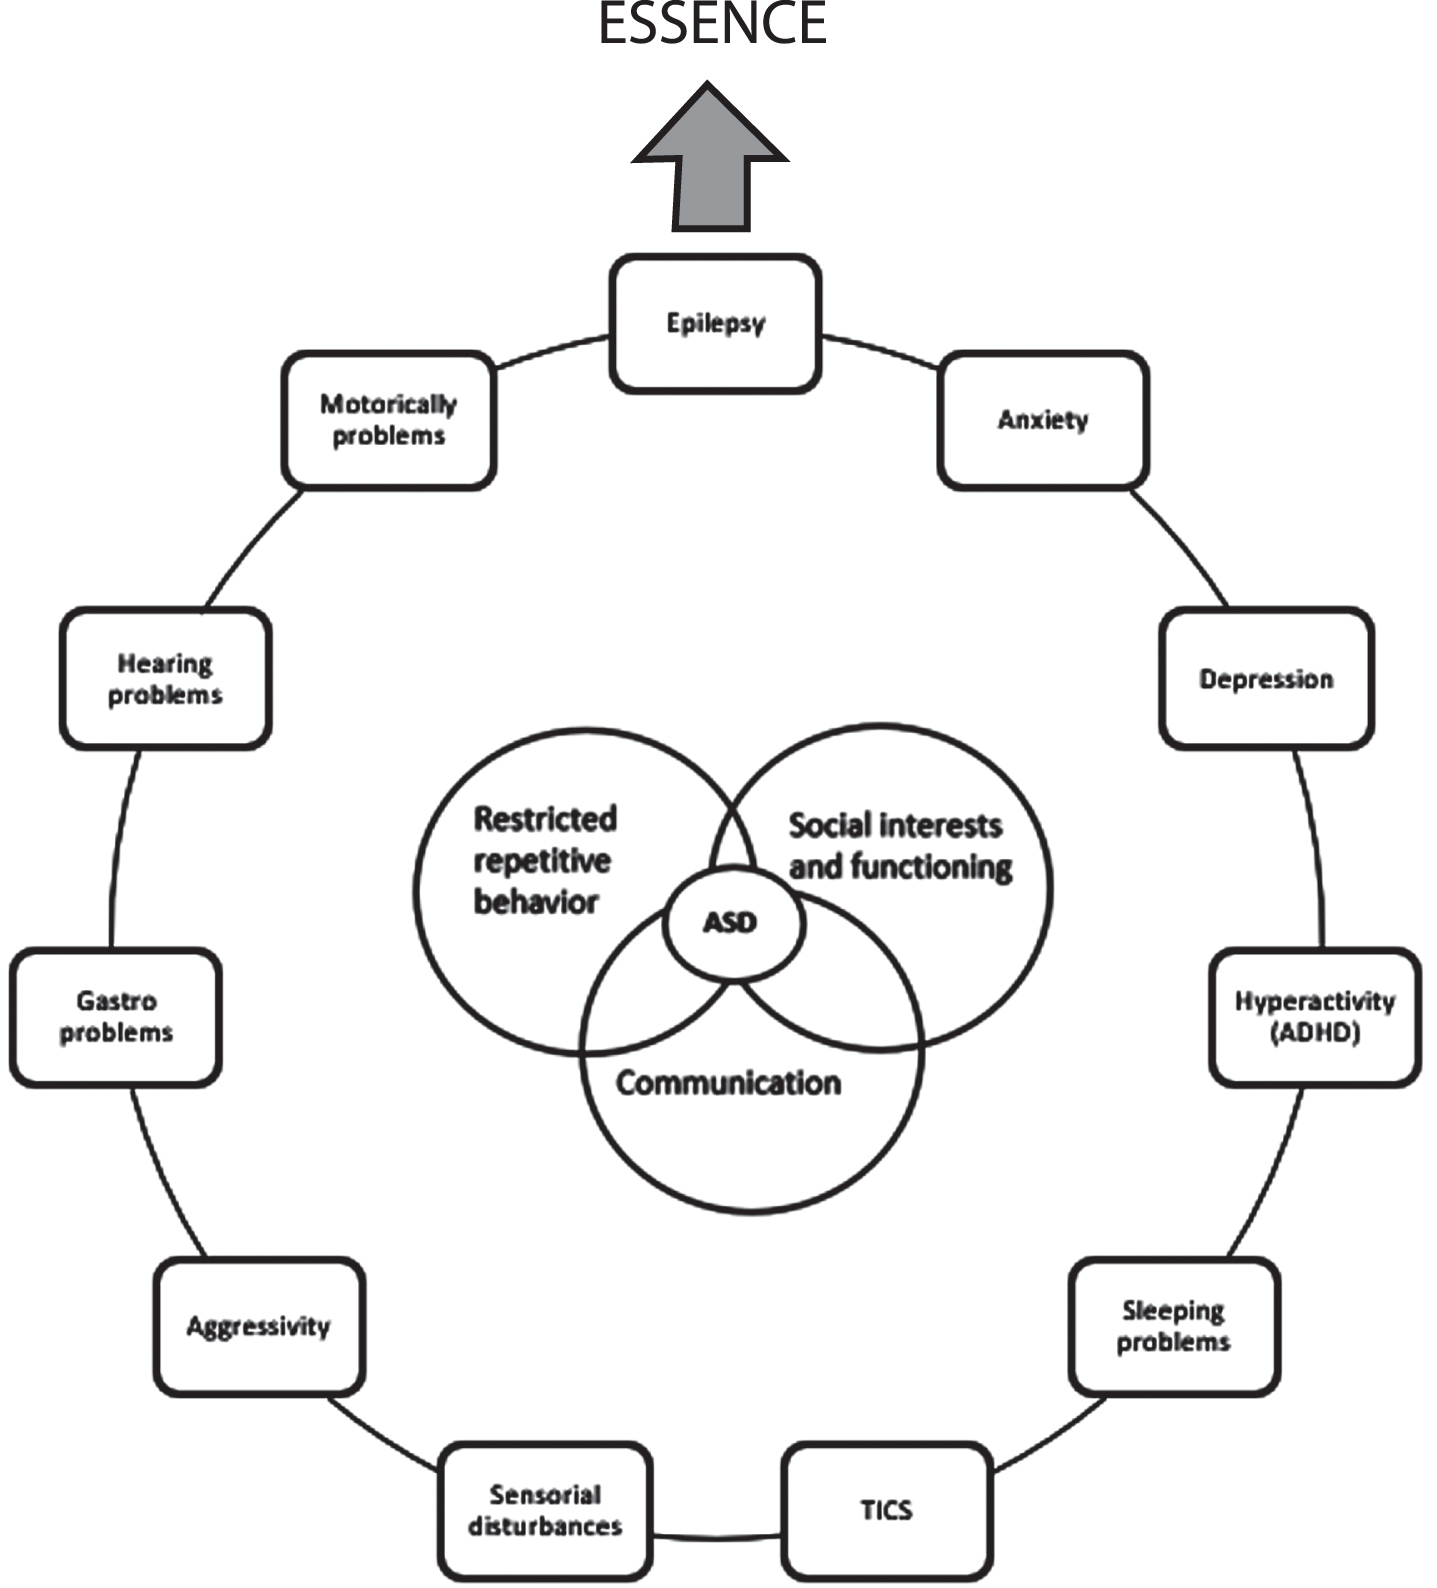 The figure illustrates the core symptoms in autism and together with some of the comorbid clinical factors which can occur together with autism and its relation to the term ESSENCE.